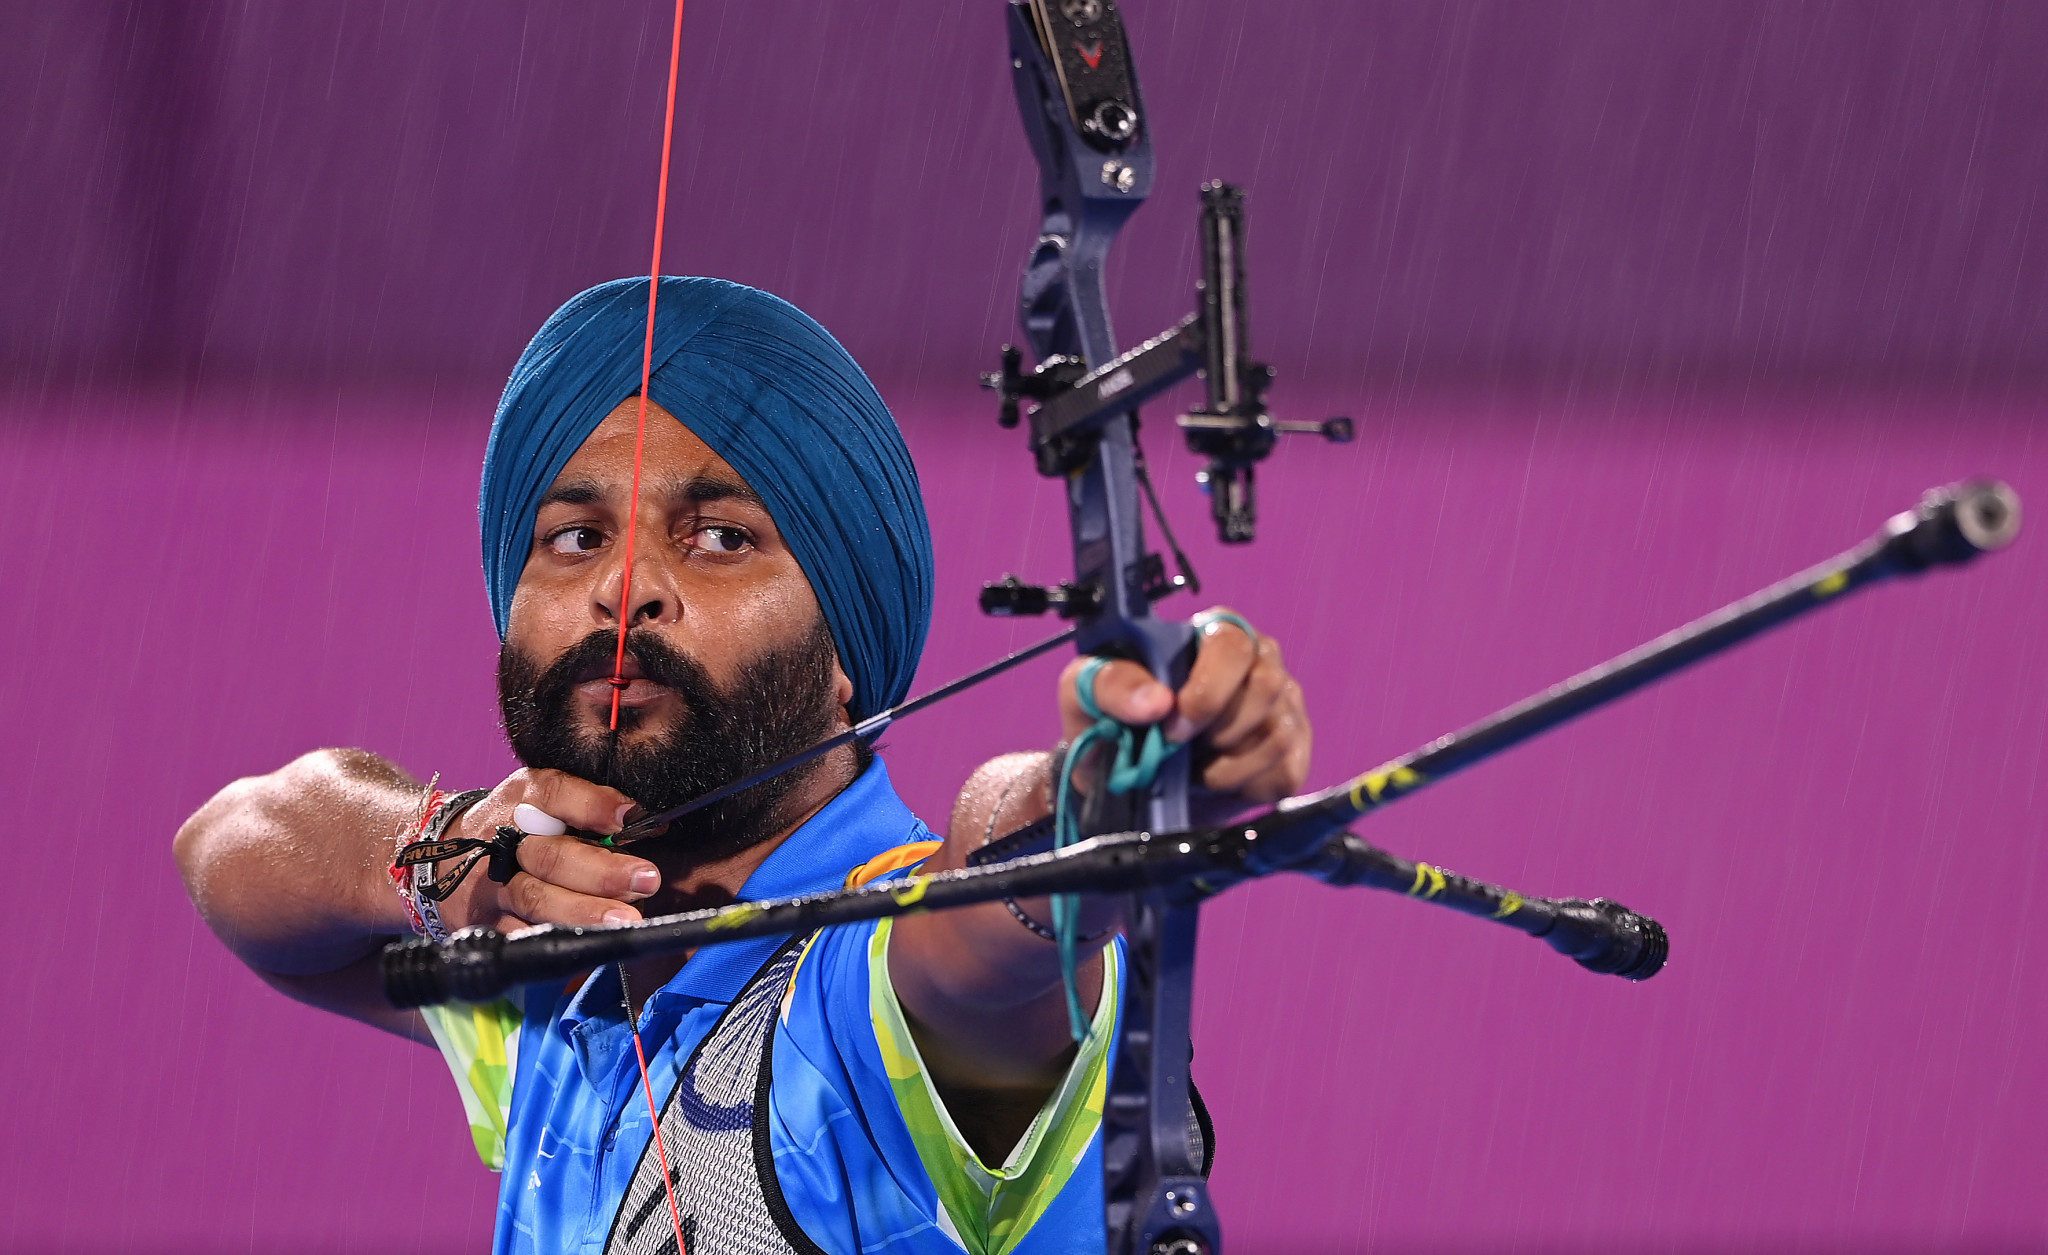 Harvinder Singh won India's first Paralympic archery medal ©Getty Images